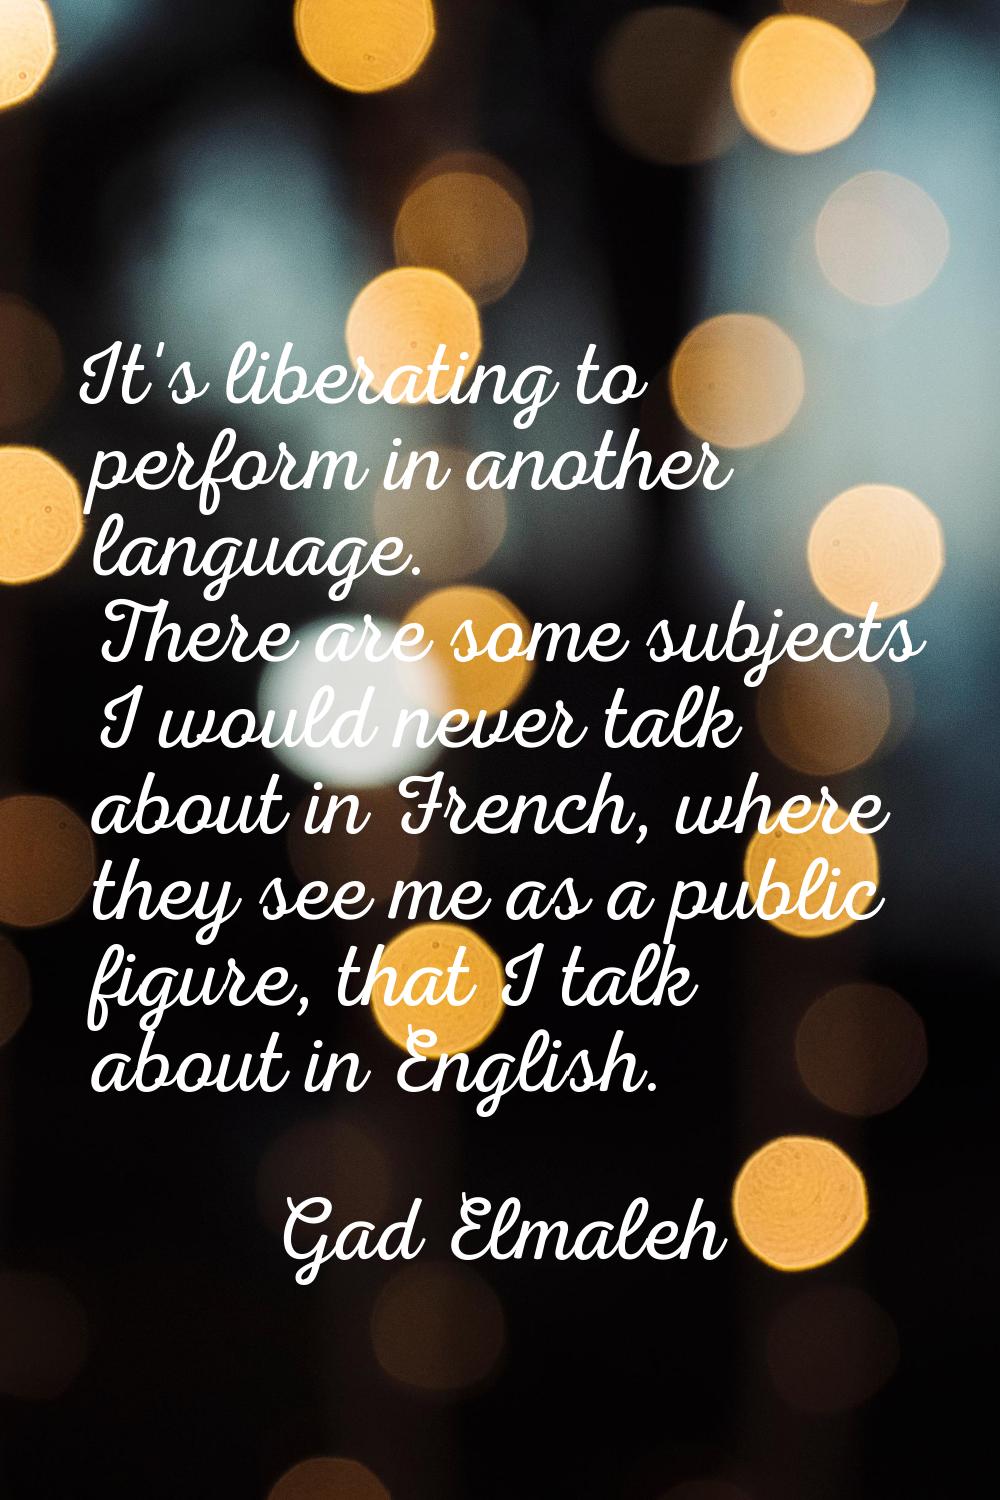 It's liberating to perform in another language. There are some subjects I would never talk about in